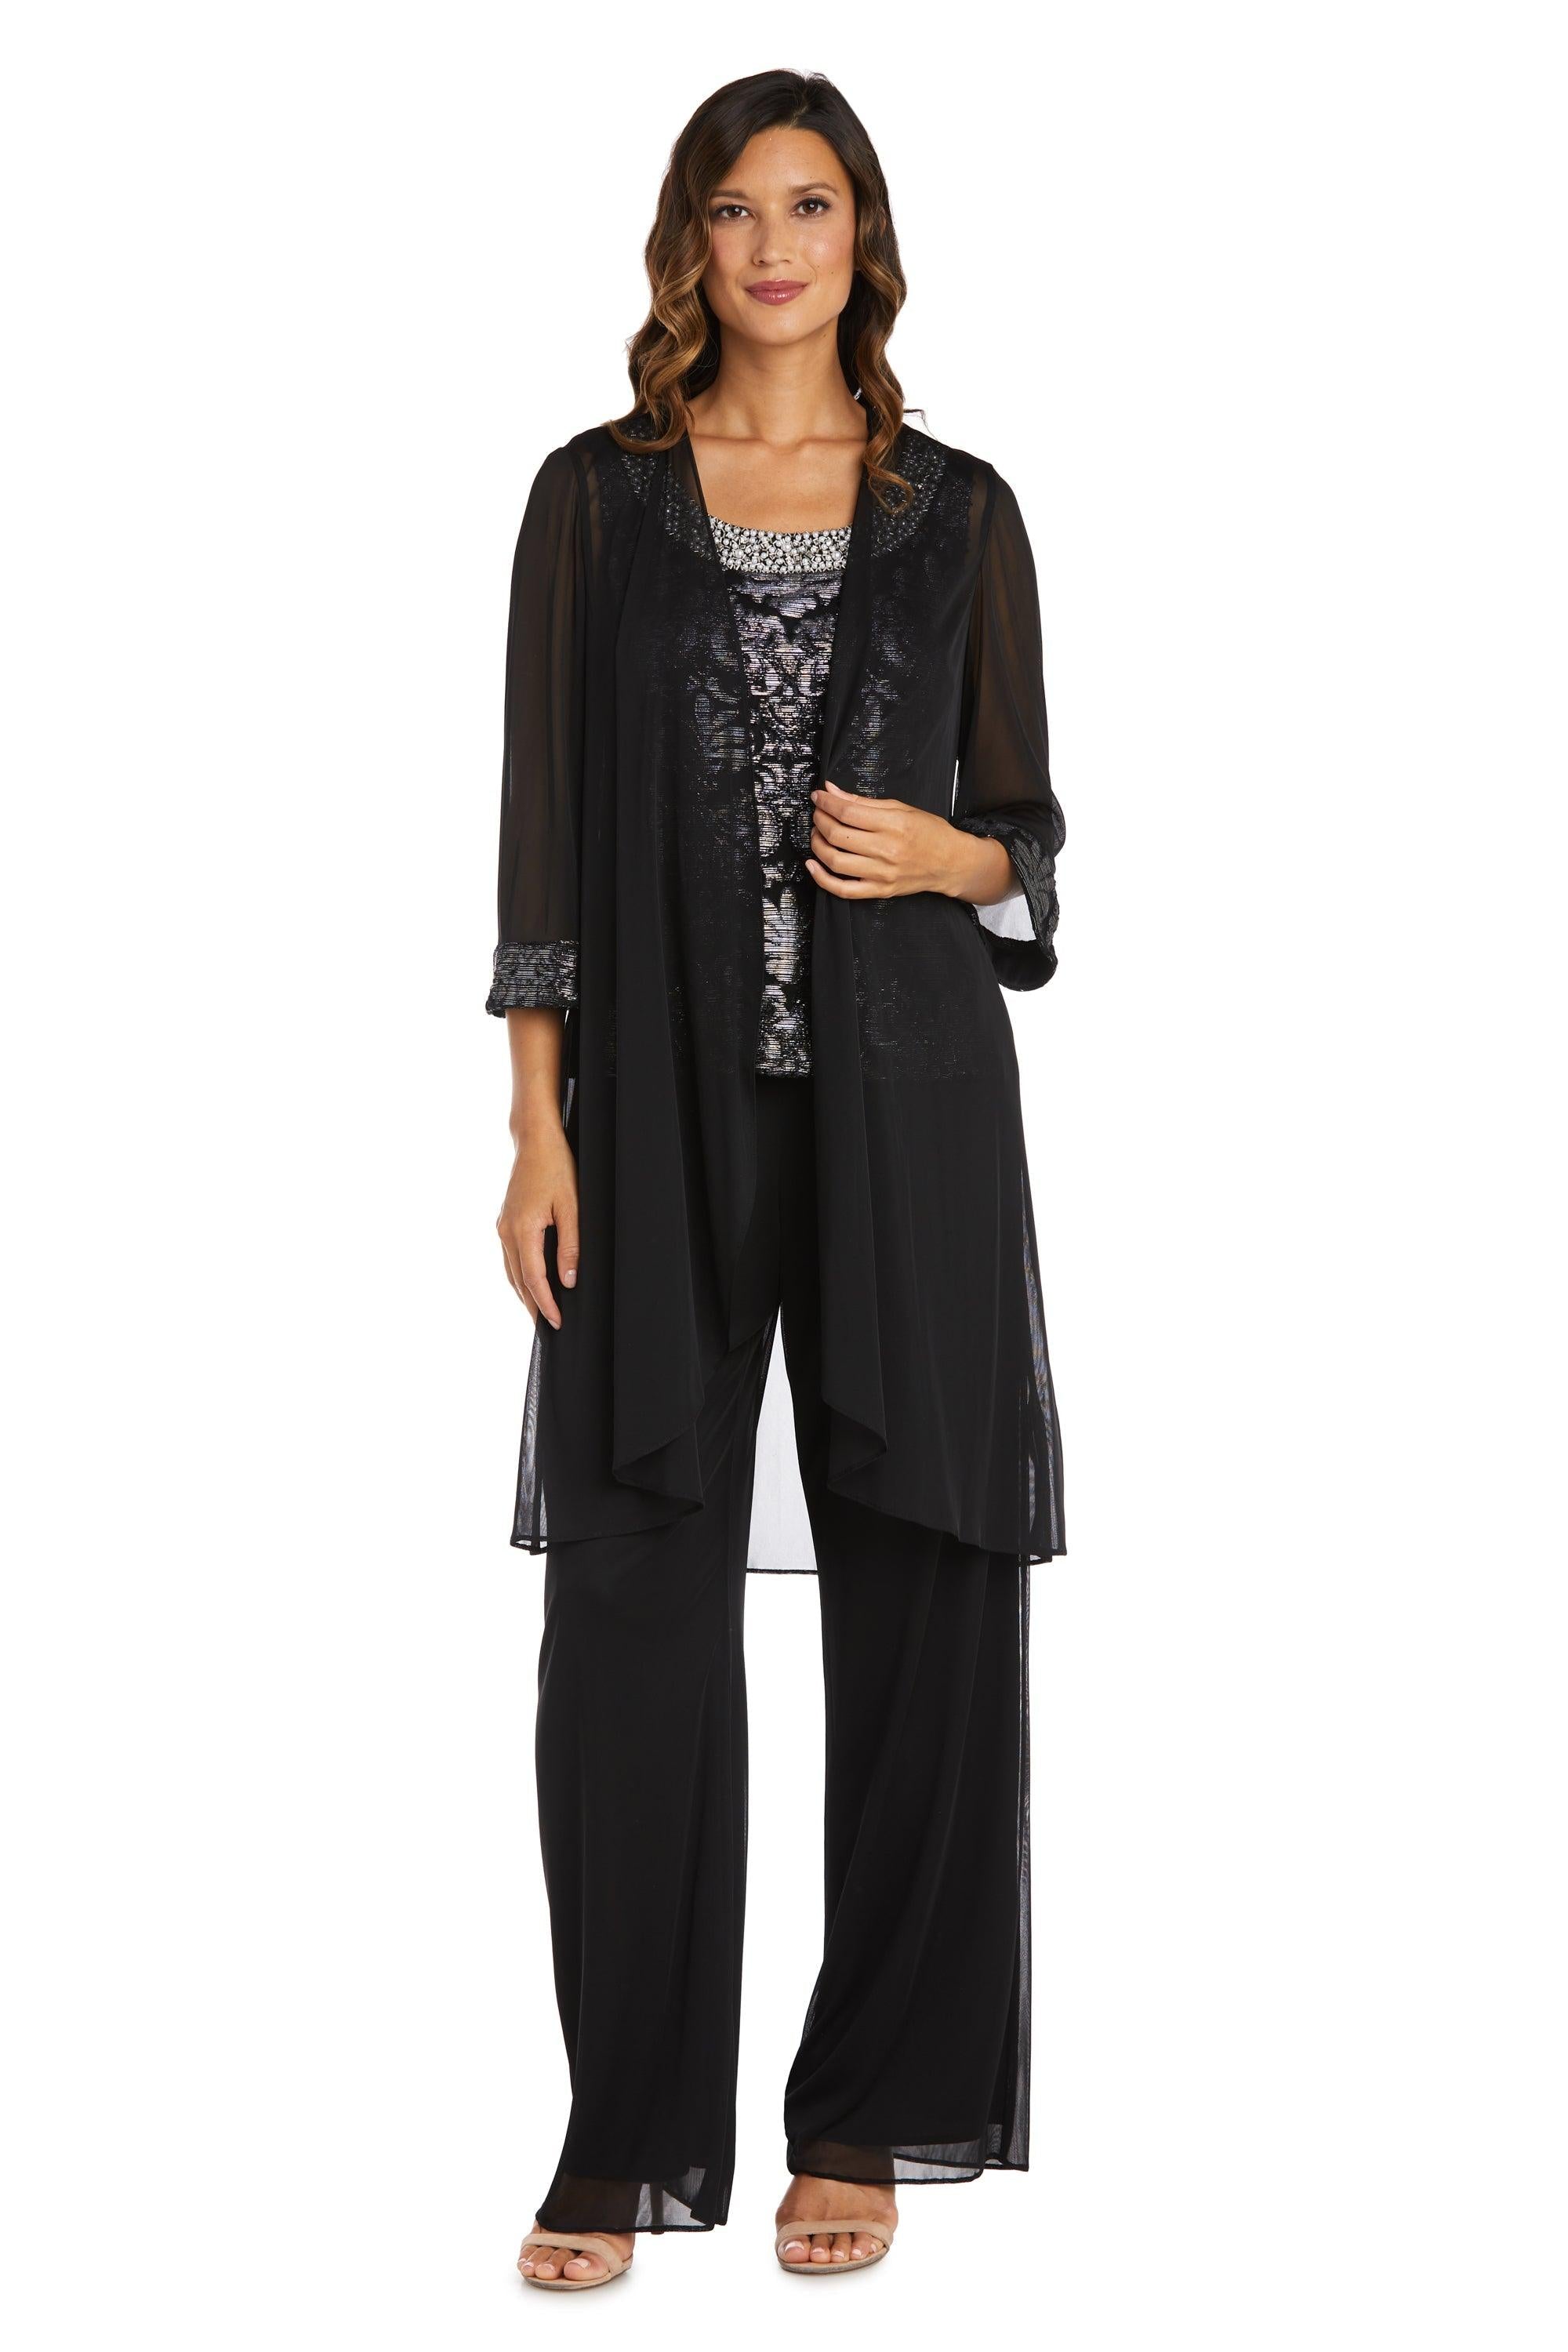 R&M Richards Formal Beaded Duster Pant Suit 7676 - The Dress Outlet